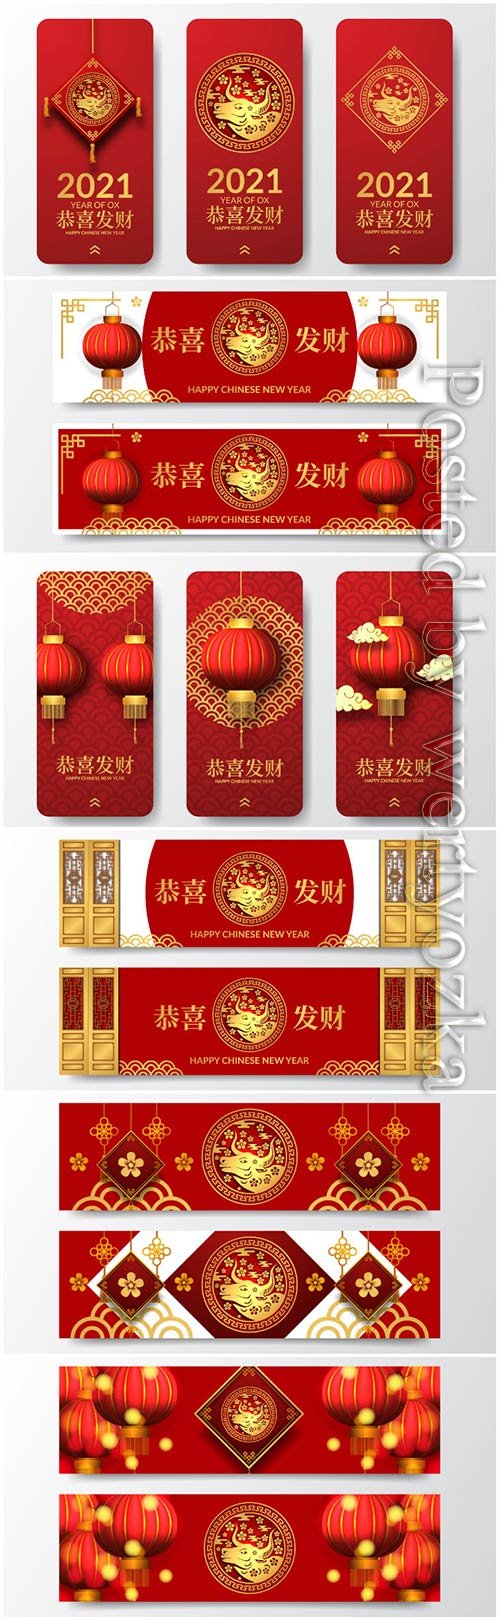 Happy chinese new year 2021 vector illustrations